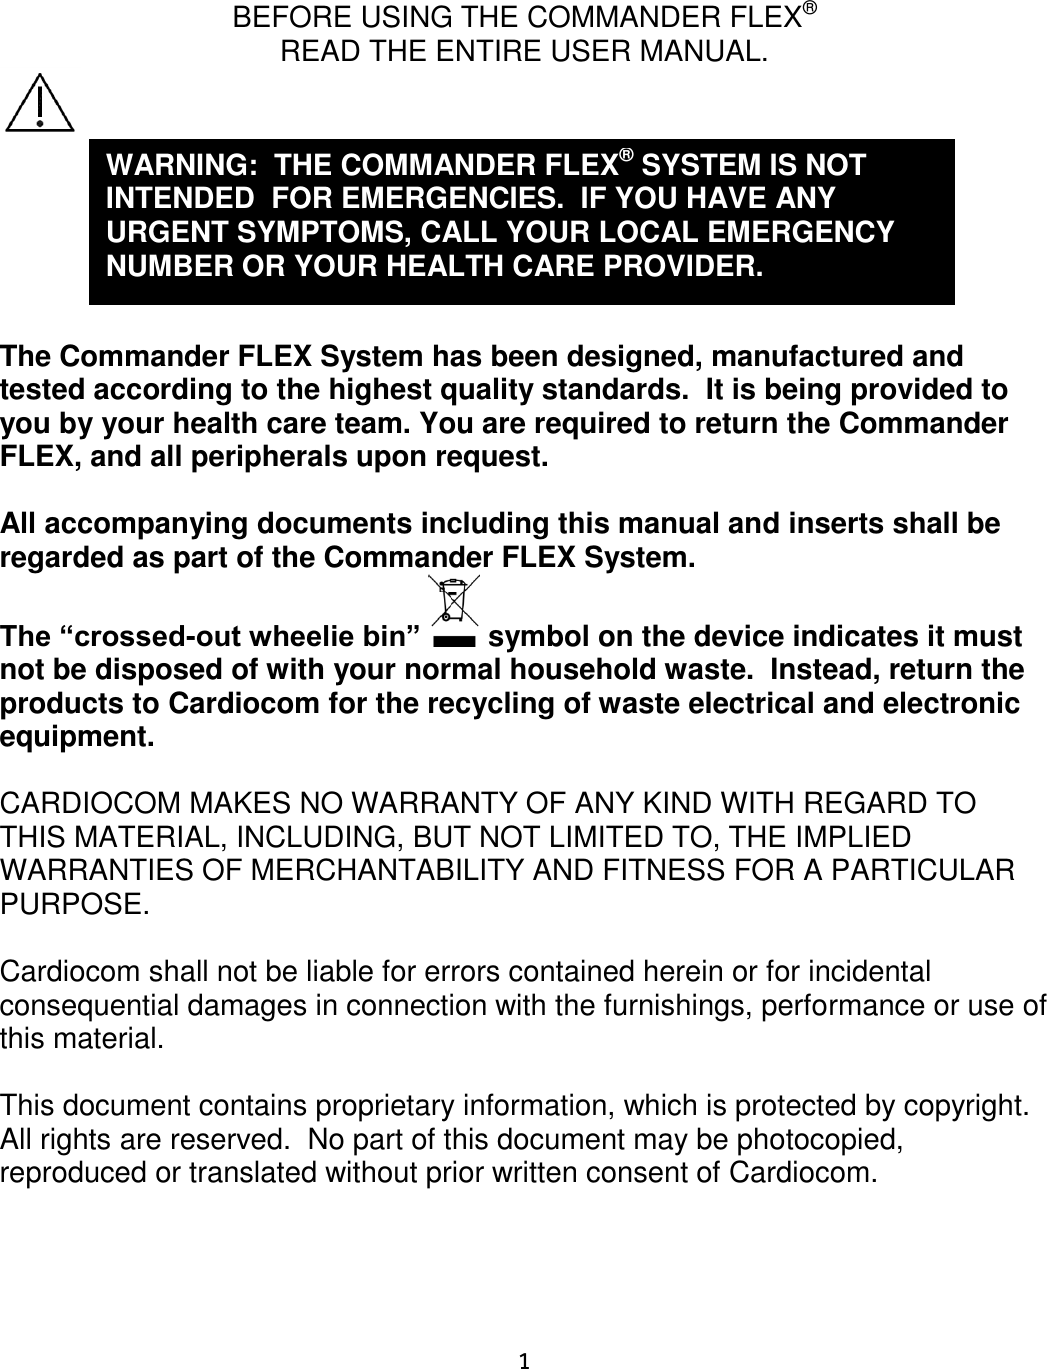     1    BEFORE USING THE COMMANDER FLEX®  READ THE ENTIRE USER MANUAL.         The Commander FLEX System has been designed, manufactured and tested according to the highest quality standards.  It is being provided to you by your health care team. You are required to return the Commander FLEX, and all peripherals upon request.  All accompanying documents including this manual and inserts shall be regarded as part of the Commander FLEX System.  The “crossed-out wheelie bin”   symbol on the device indicates it must not be disposed of with your normal household waste.  Instead, return the products to Cardiocom for the recycling of waste electrical and electronic equipment.  CARDIOCOM MAKES NO WARRANTY OF ANY KIND WITH REGARD TO THIS MATERIAL, INCLUDING, BUT NOT LIMITED TO, THE IMPLIED WARRANTIES OF MERCHANTABILITY AND FITNESS FOR A PARTICULAR PURPOSE.  Cardiocom shall not be liable for errors contained herein or for incidental consequential damages in connection with the furnishings, performance or use of this material.  This document contains proprietary information, which is protected by copyright.  All rights are reserved.  No part of this document may be photocopied, reproduced or translated without prior written consent of Cardiocom.    WARNING:  THE COMMANDER FLEX® SYSTEM IS NOT INTENDED  FOR EMERGENCIES.  IF YOU HAVE ANY URGENT SYMPTOMS, CALL YOUR LOCAL EMERGENCY NUMBER OR YOUR HEALTH CARE PROVIDER. 